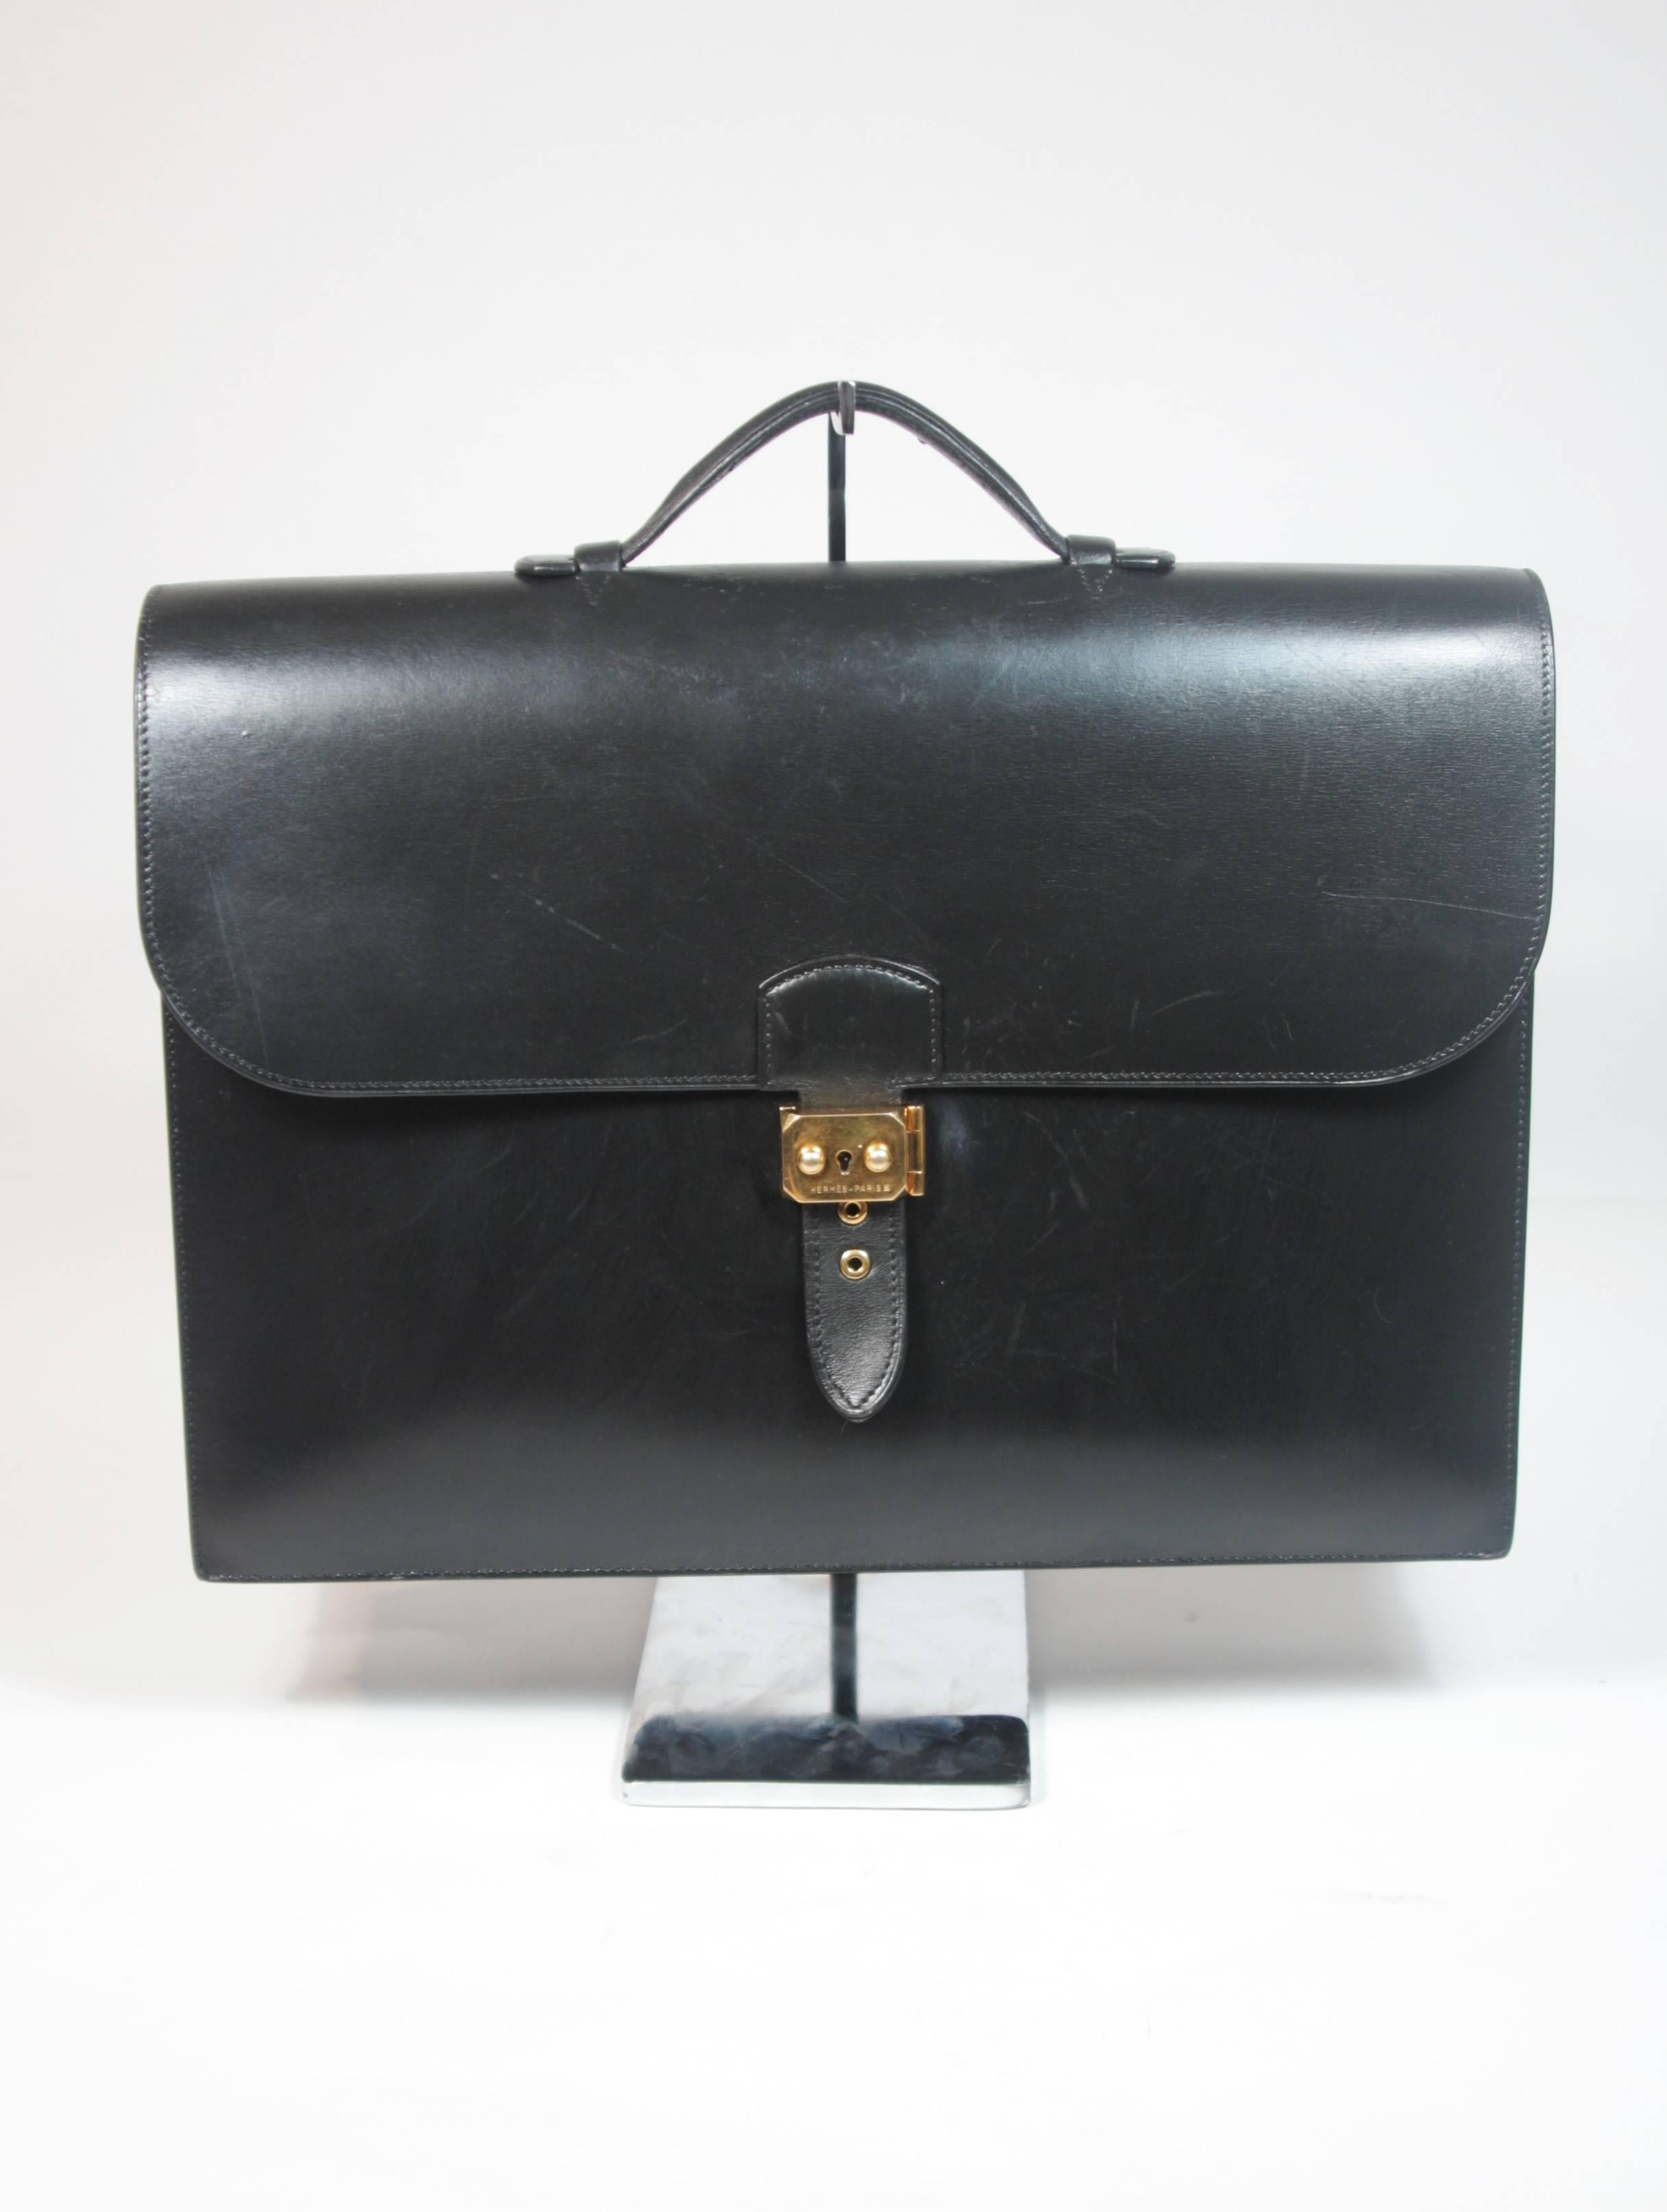 This Hermes briefcase is composed of a black box leather and features gold hardware. There is a top handle and three large interior compartments. The bag is in great vintage condition, there are some indentations at the top of the bag by the handle